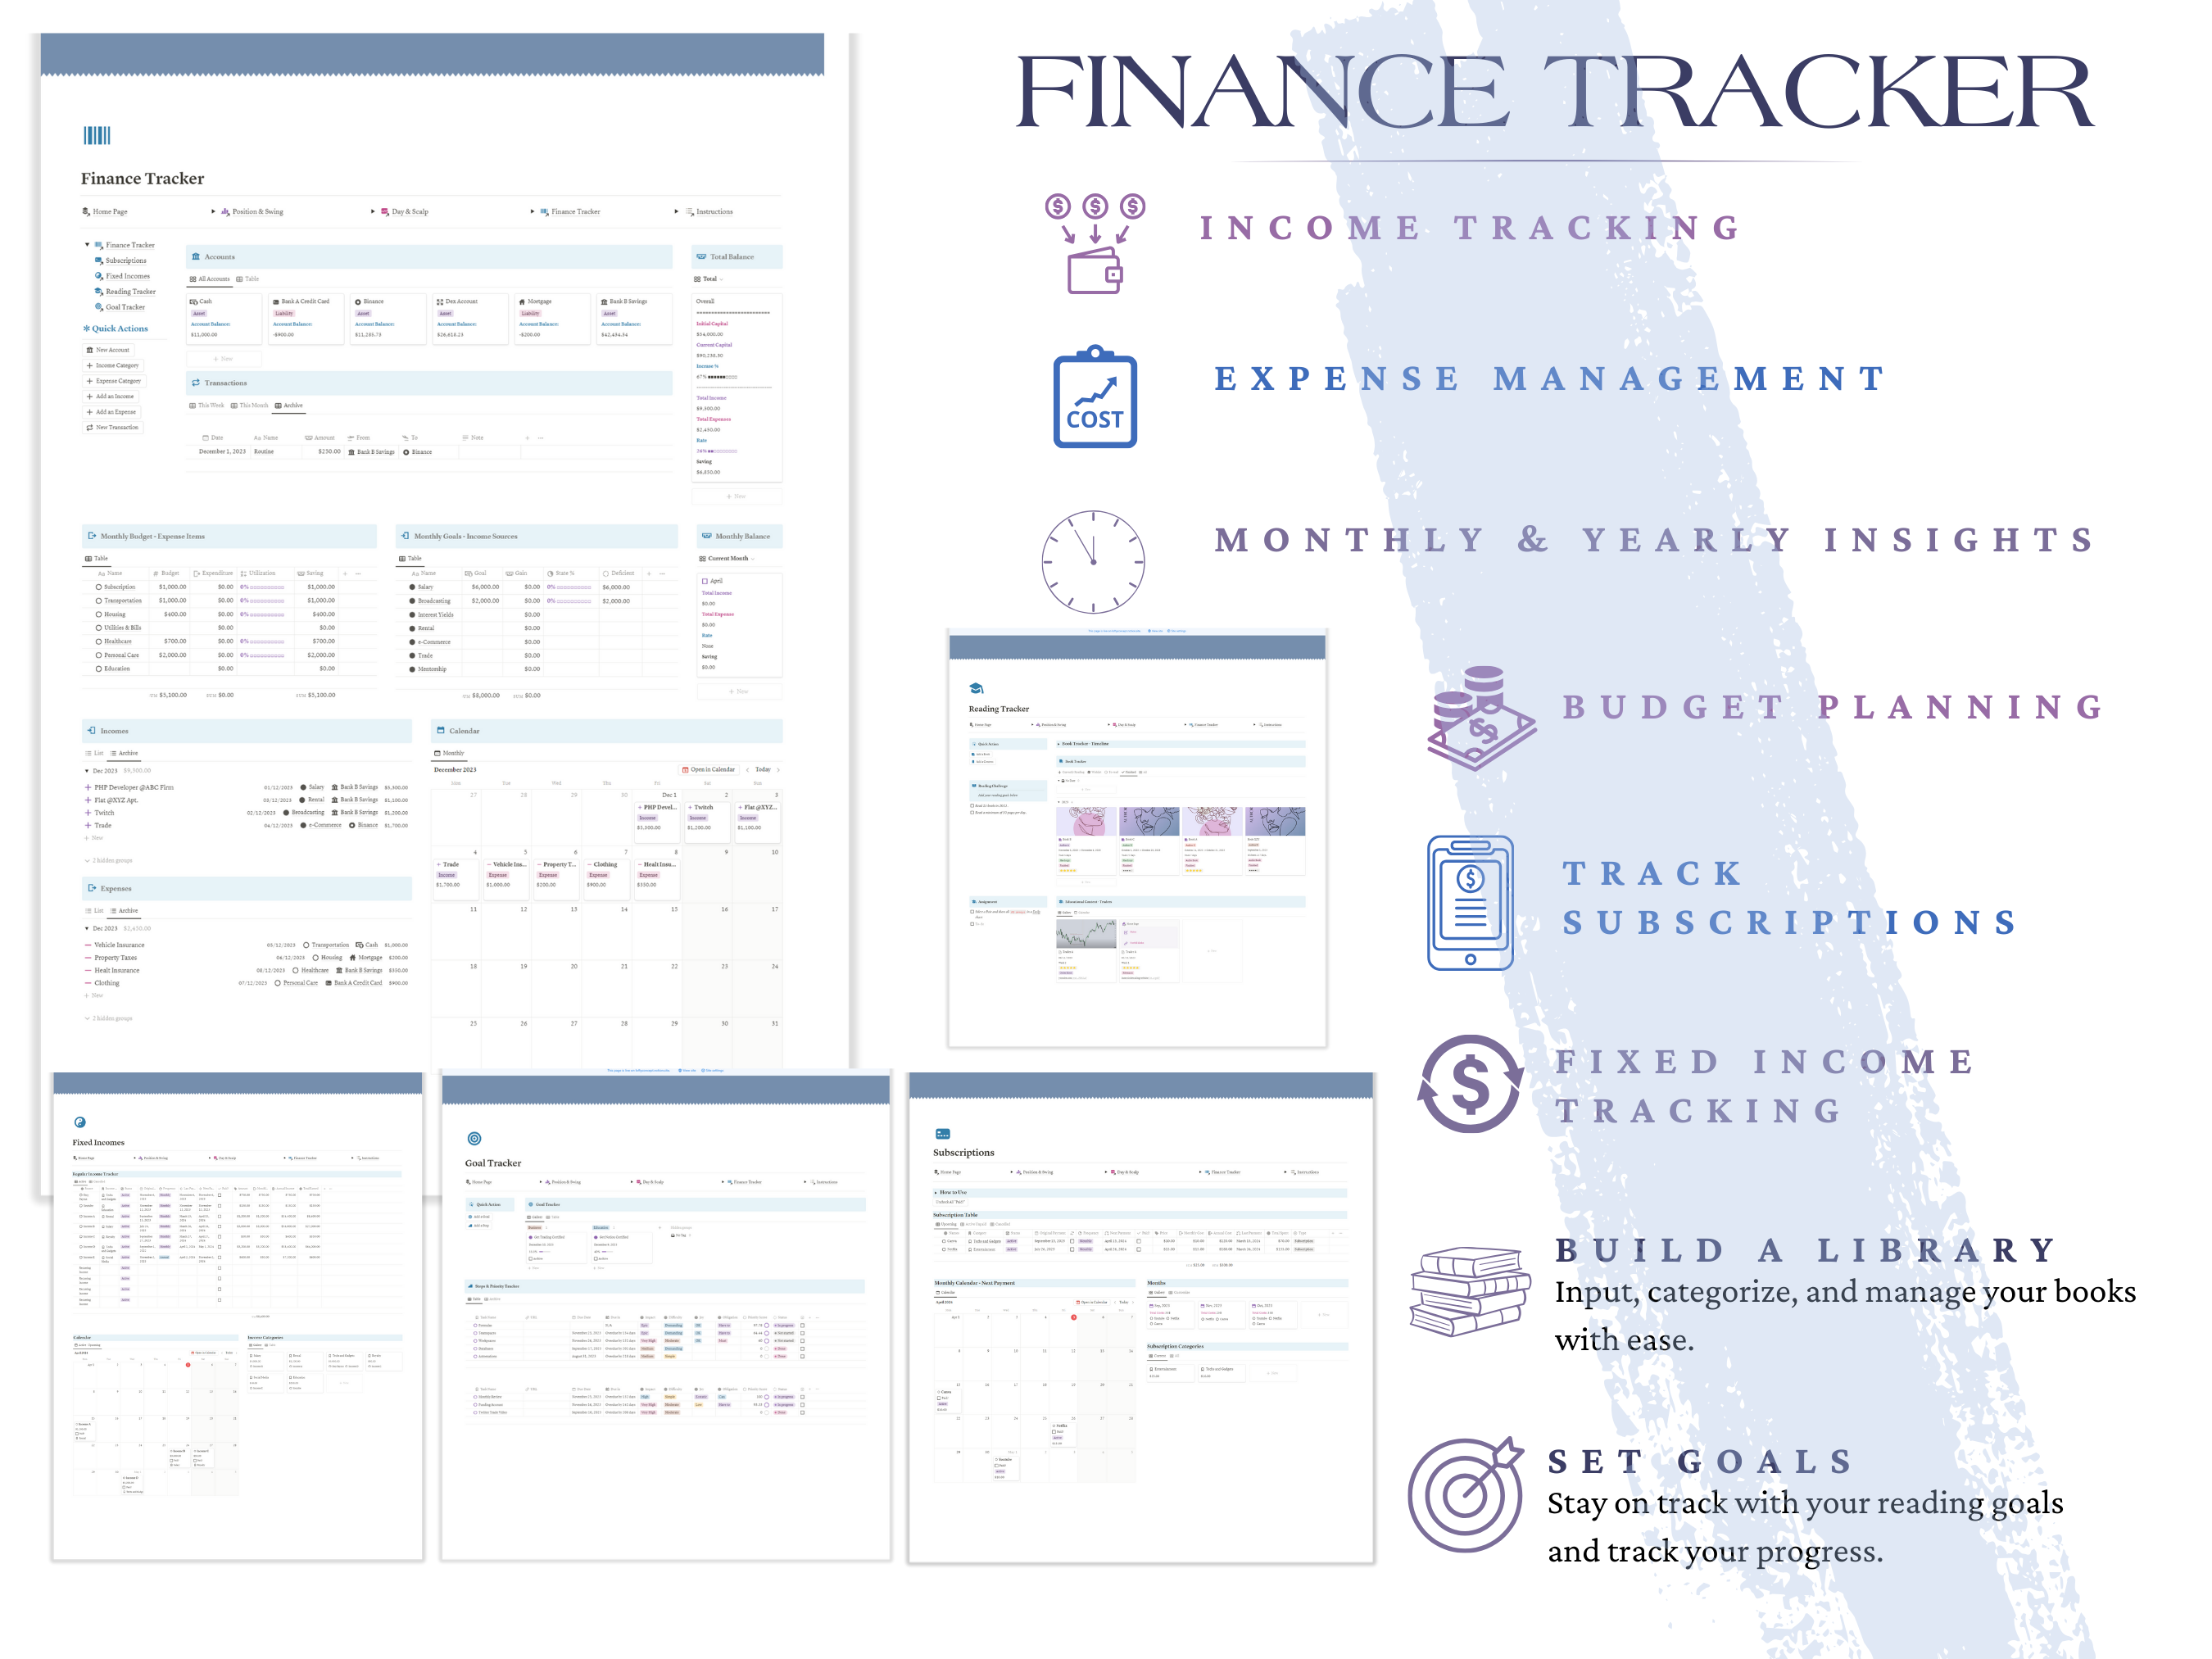 Portfolio Tracker & Trading Journals | Poisition and Swing Trading Journal | Scalping & Day Trading | Risk, Routine, and Psychology Management Tools | Weekly, Monthly, Yearly Review | Analytics & Statistics Dashboards | Interactive Financial Widgets